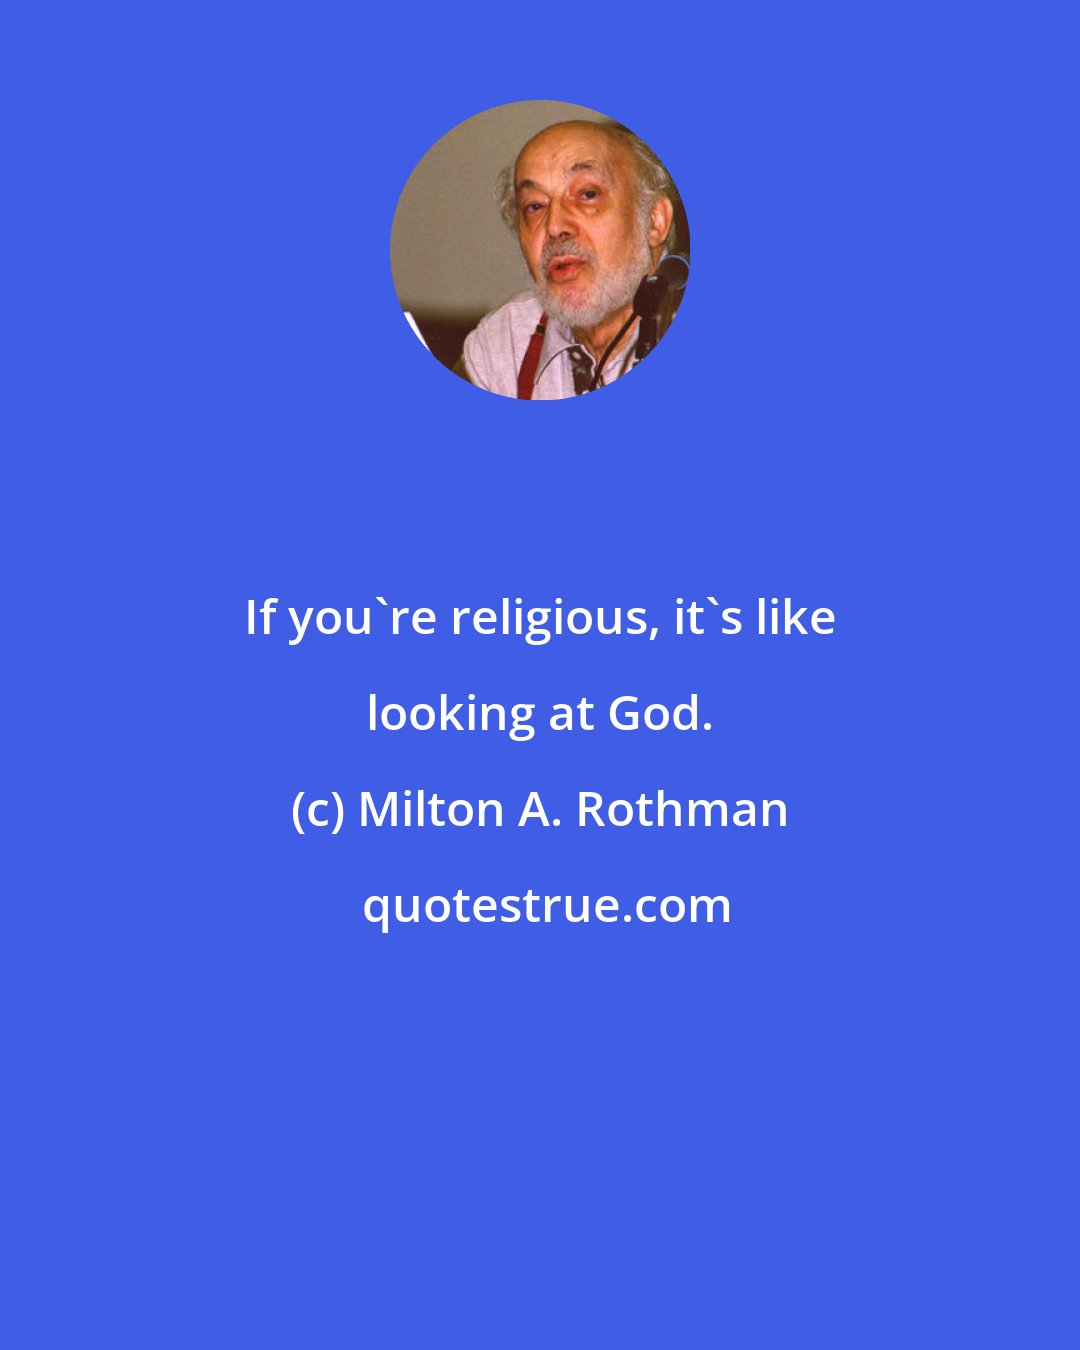 Milton A. Rothman: If you're religious, it's like looking at God.